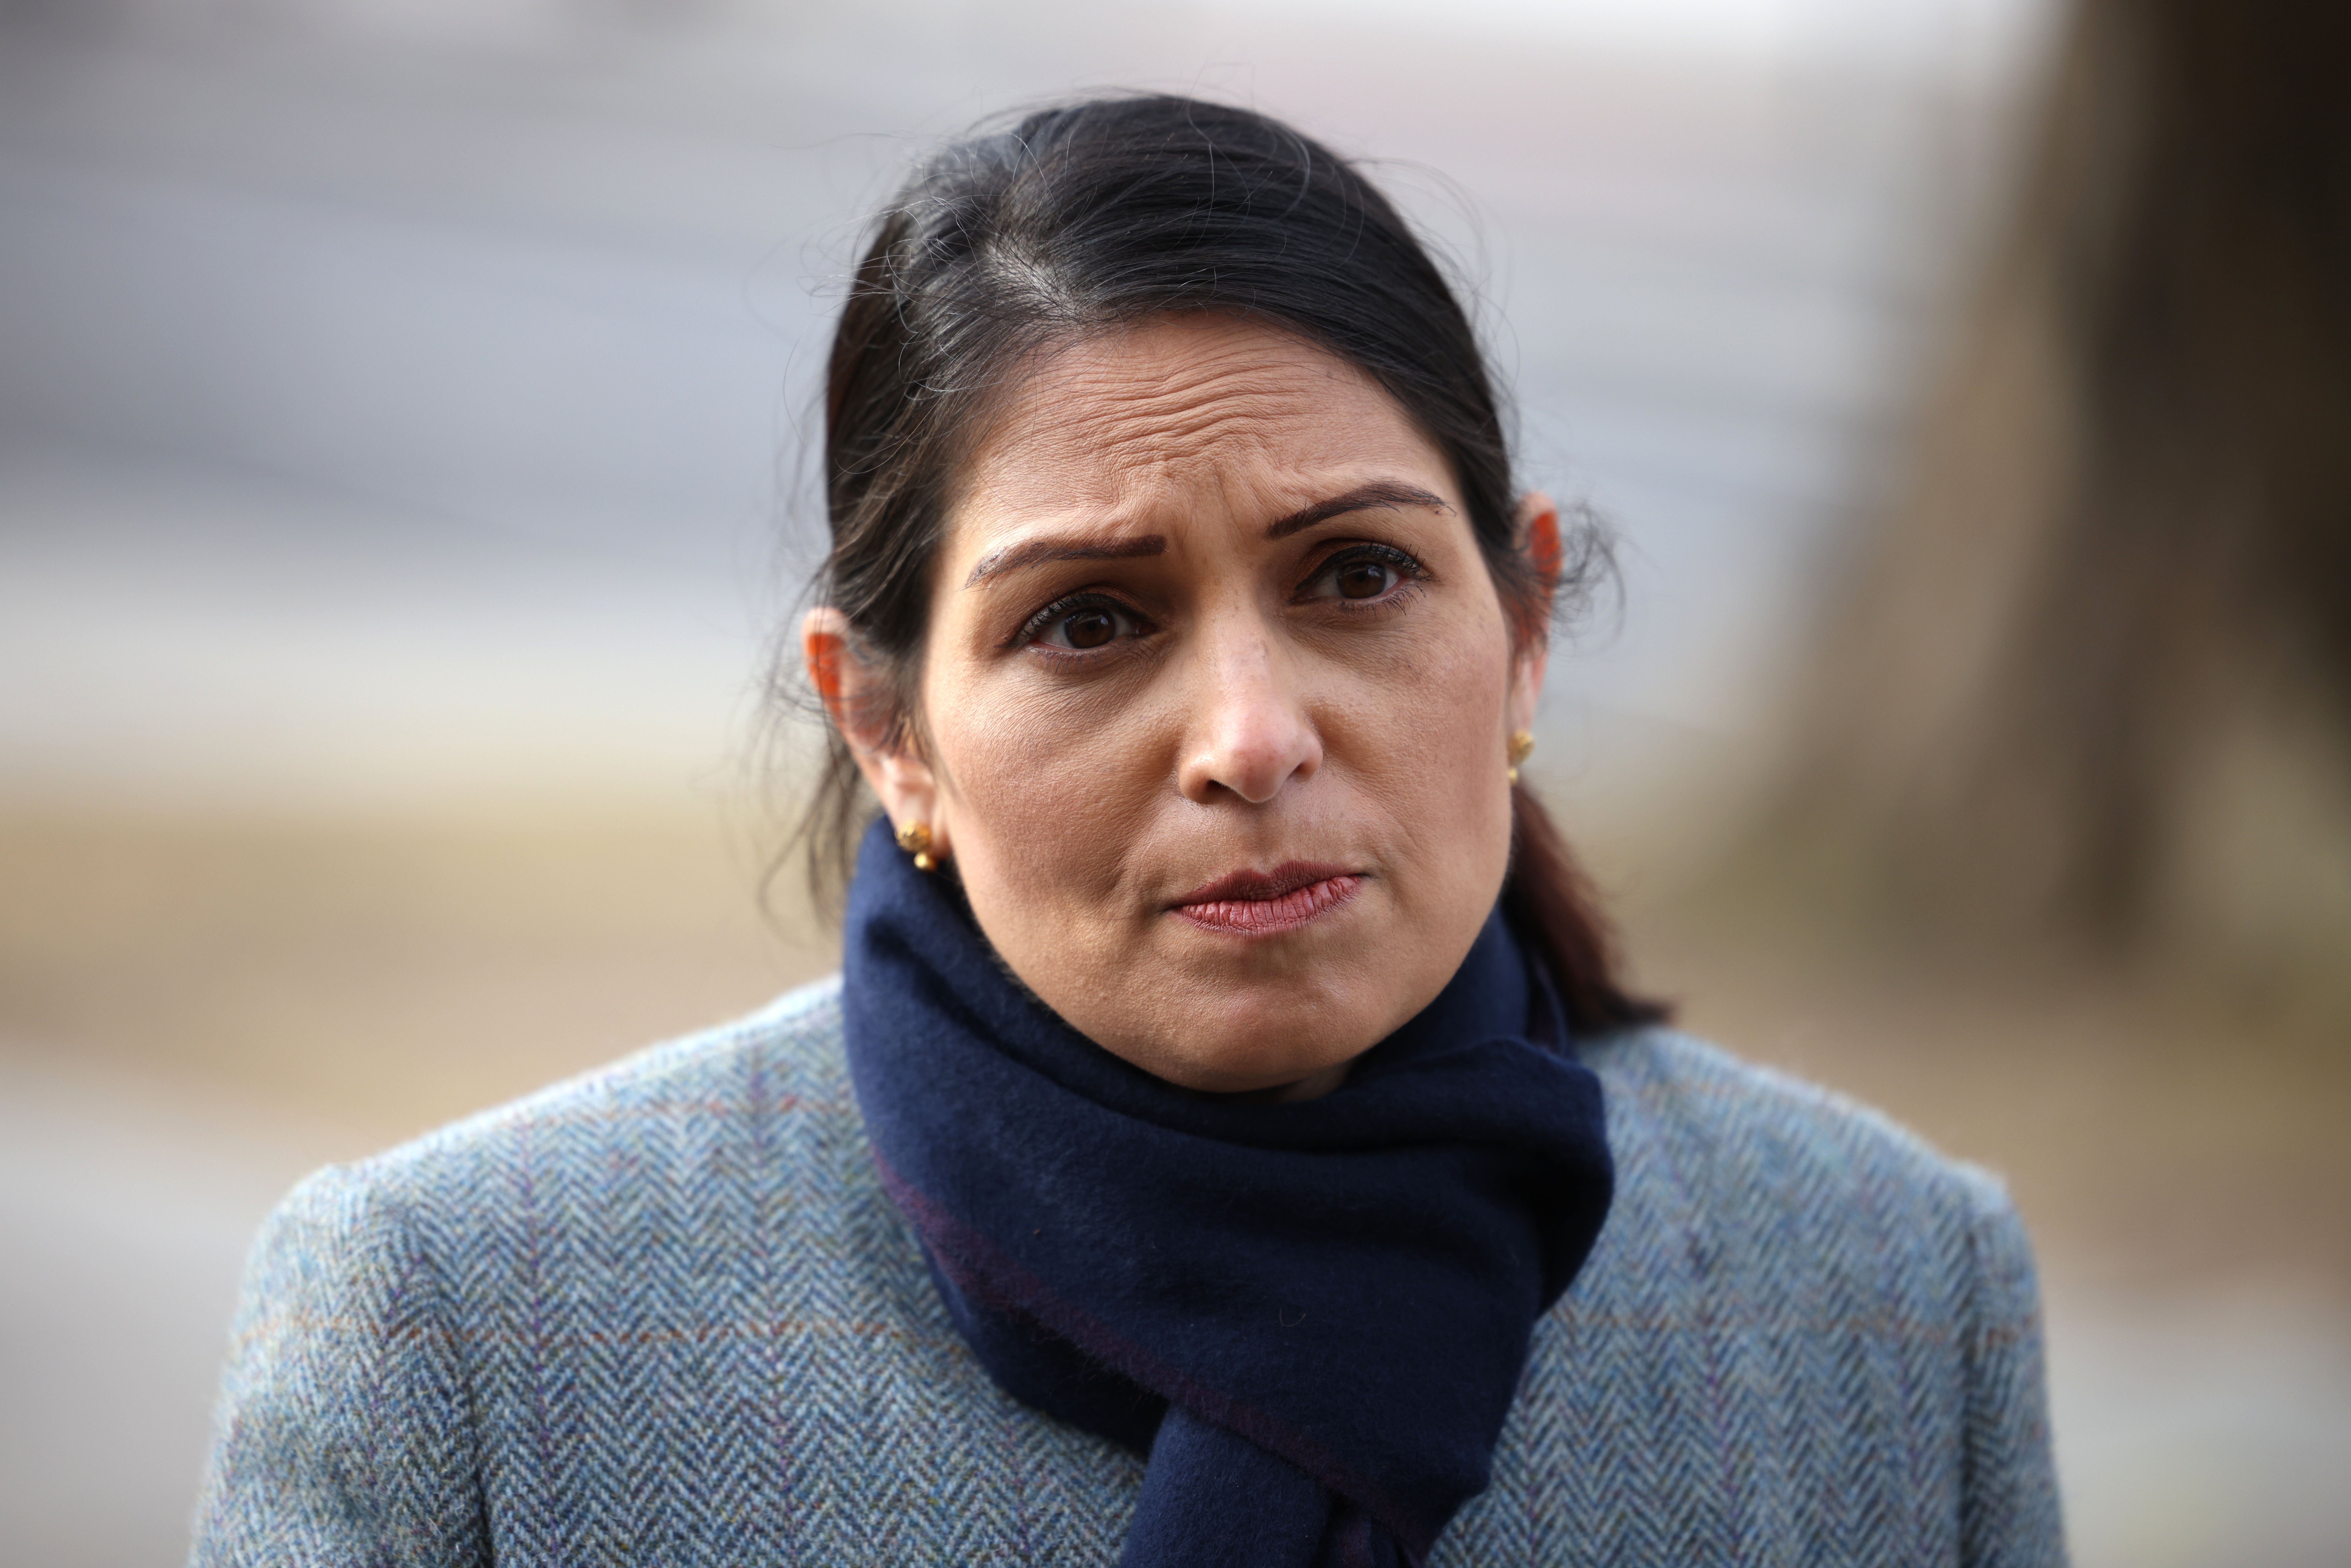 Home secretary Priti Patel’s asylum plans, unveiled in March, have come under criticism from lawyers